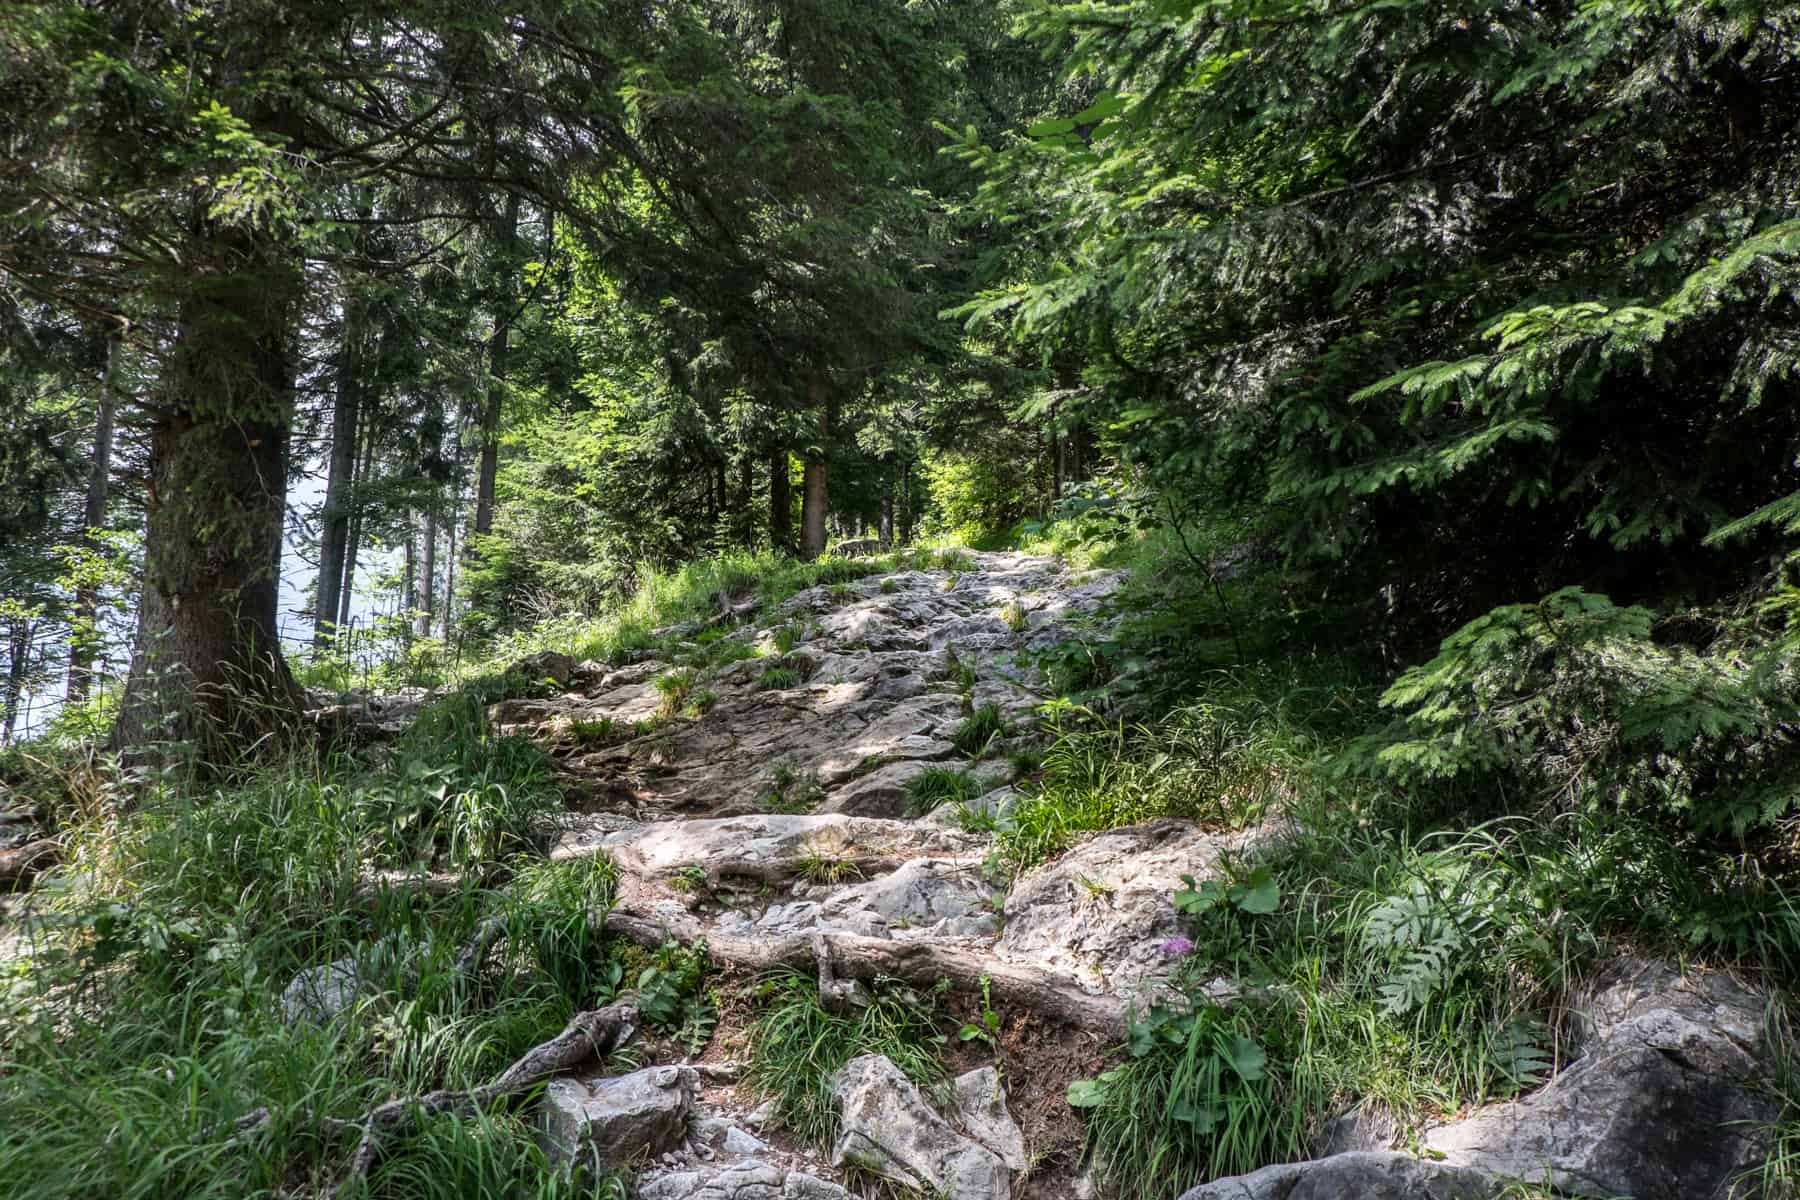 A steep rocky pathway that is part of the hike on the Schöckl Mountain, Graz